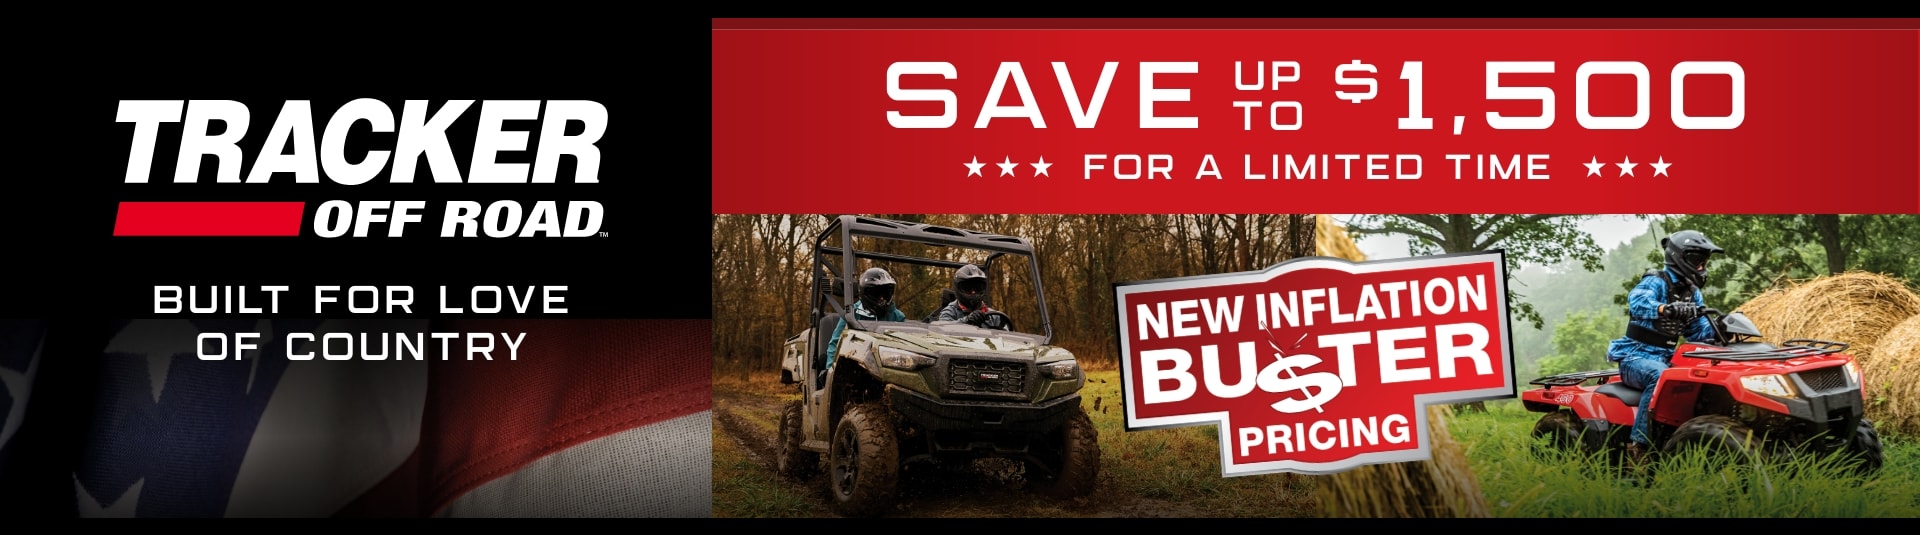 Tracker Offroad Offer - Save up to $1500 for a limited time